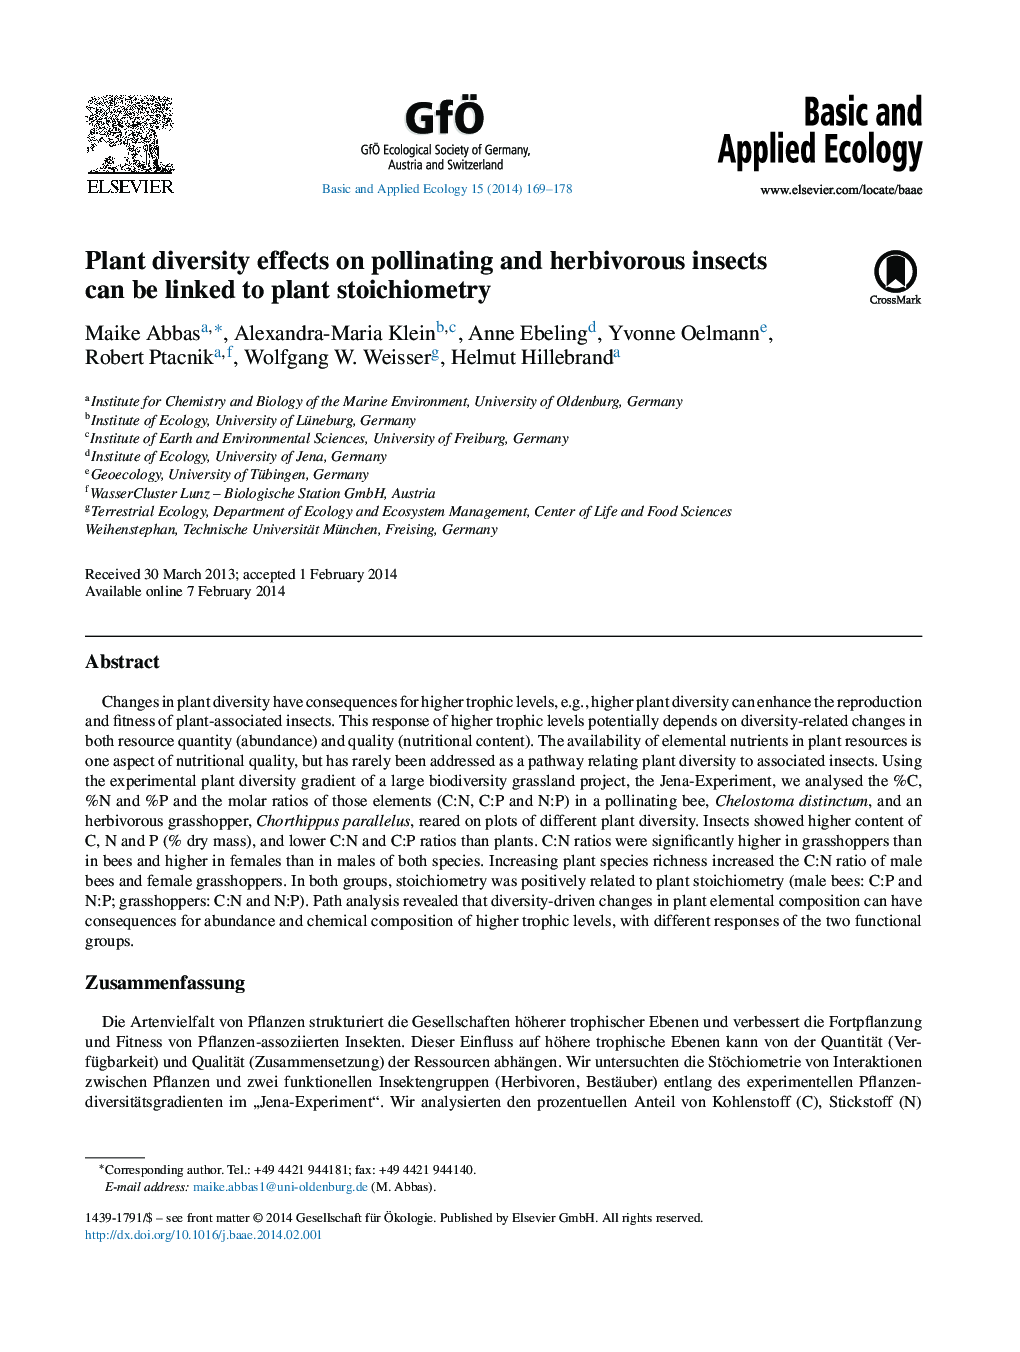 Plant diversity effects on pollinating and herbivorous insects can be linked to plant stoichiometry